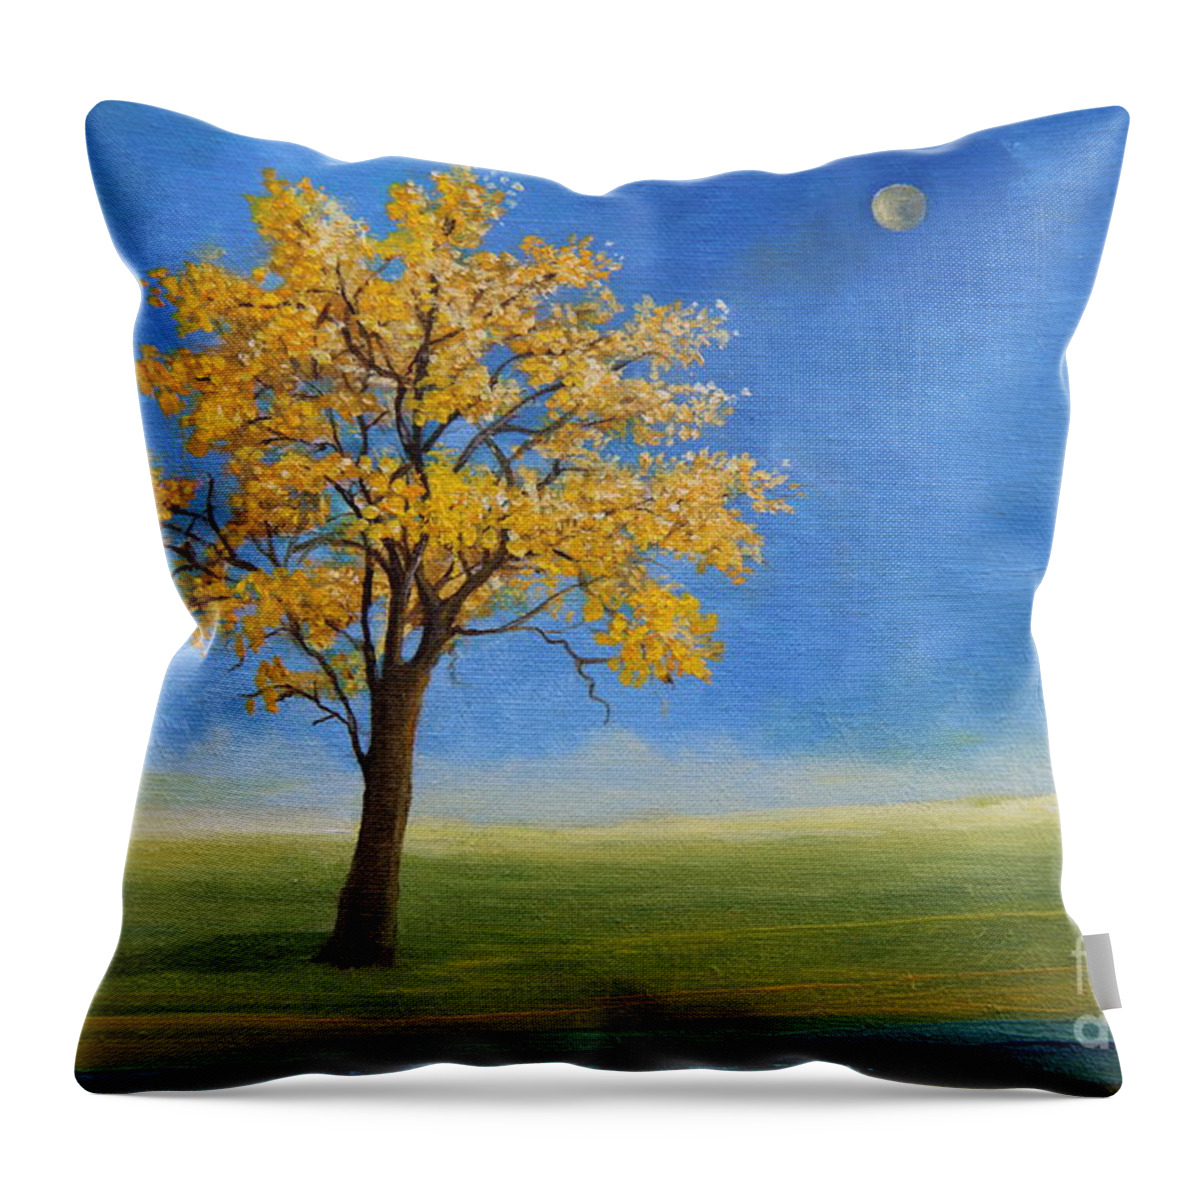 Alicia Maury Prints Throw Pillow featuring the painting Roble Tree by Alicia Maury